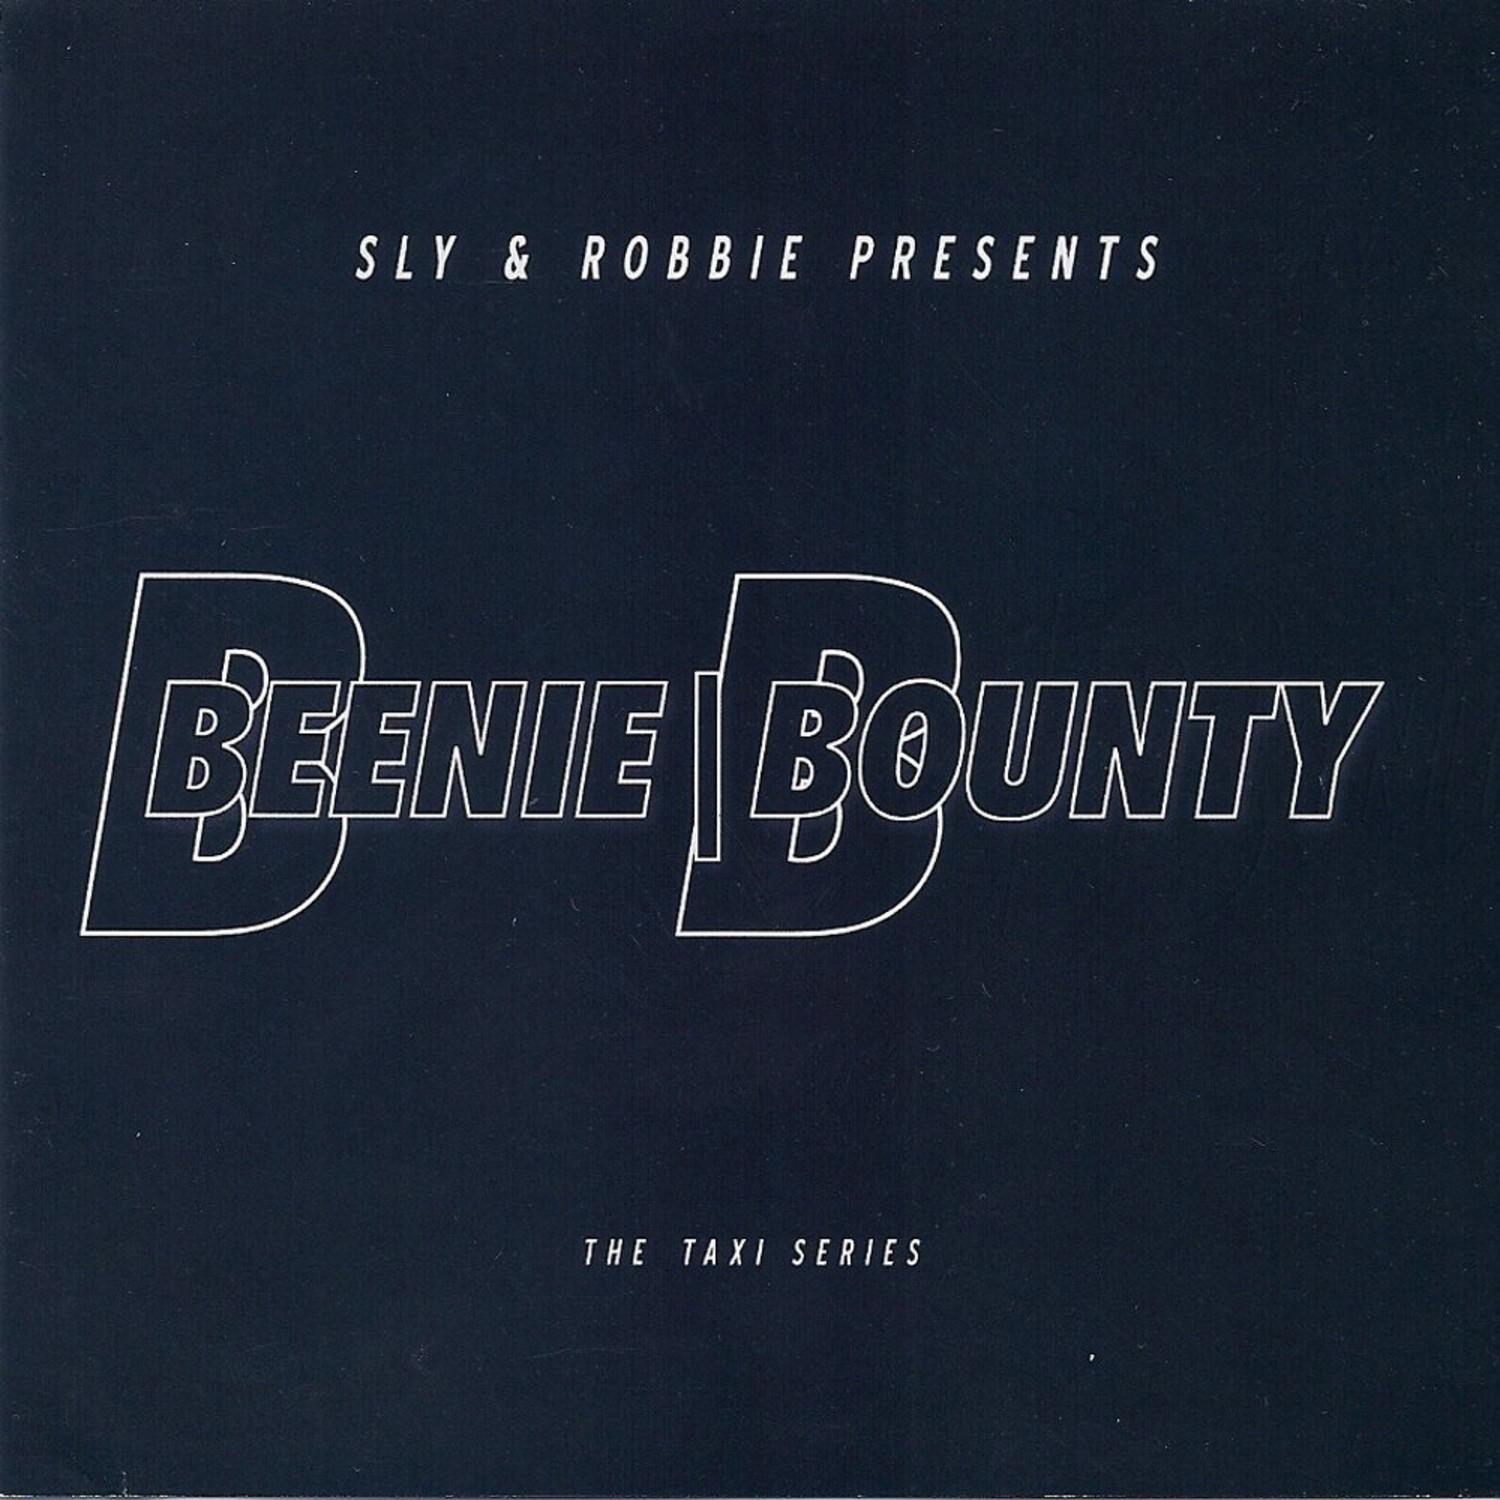 Sly & Robbie presents Beenie \ Bounty: The Taxi Series